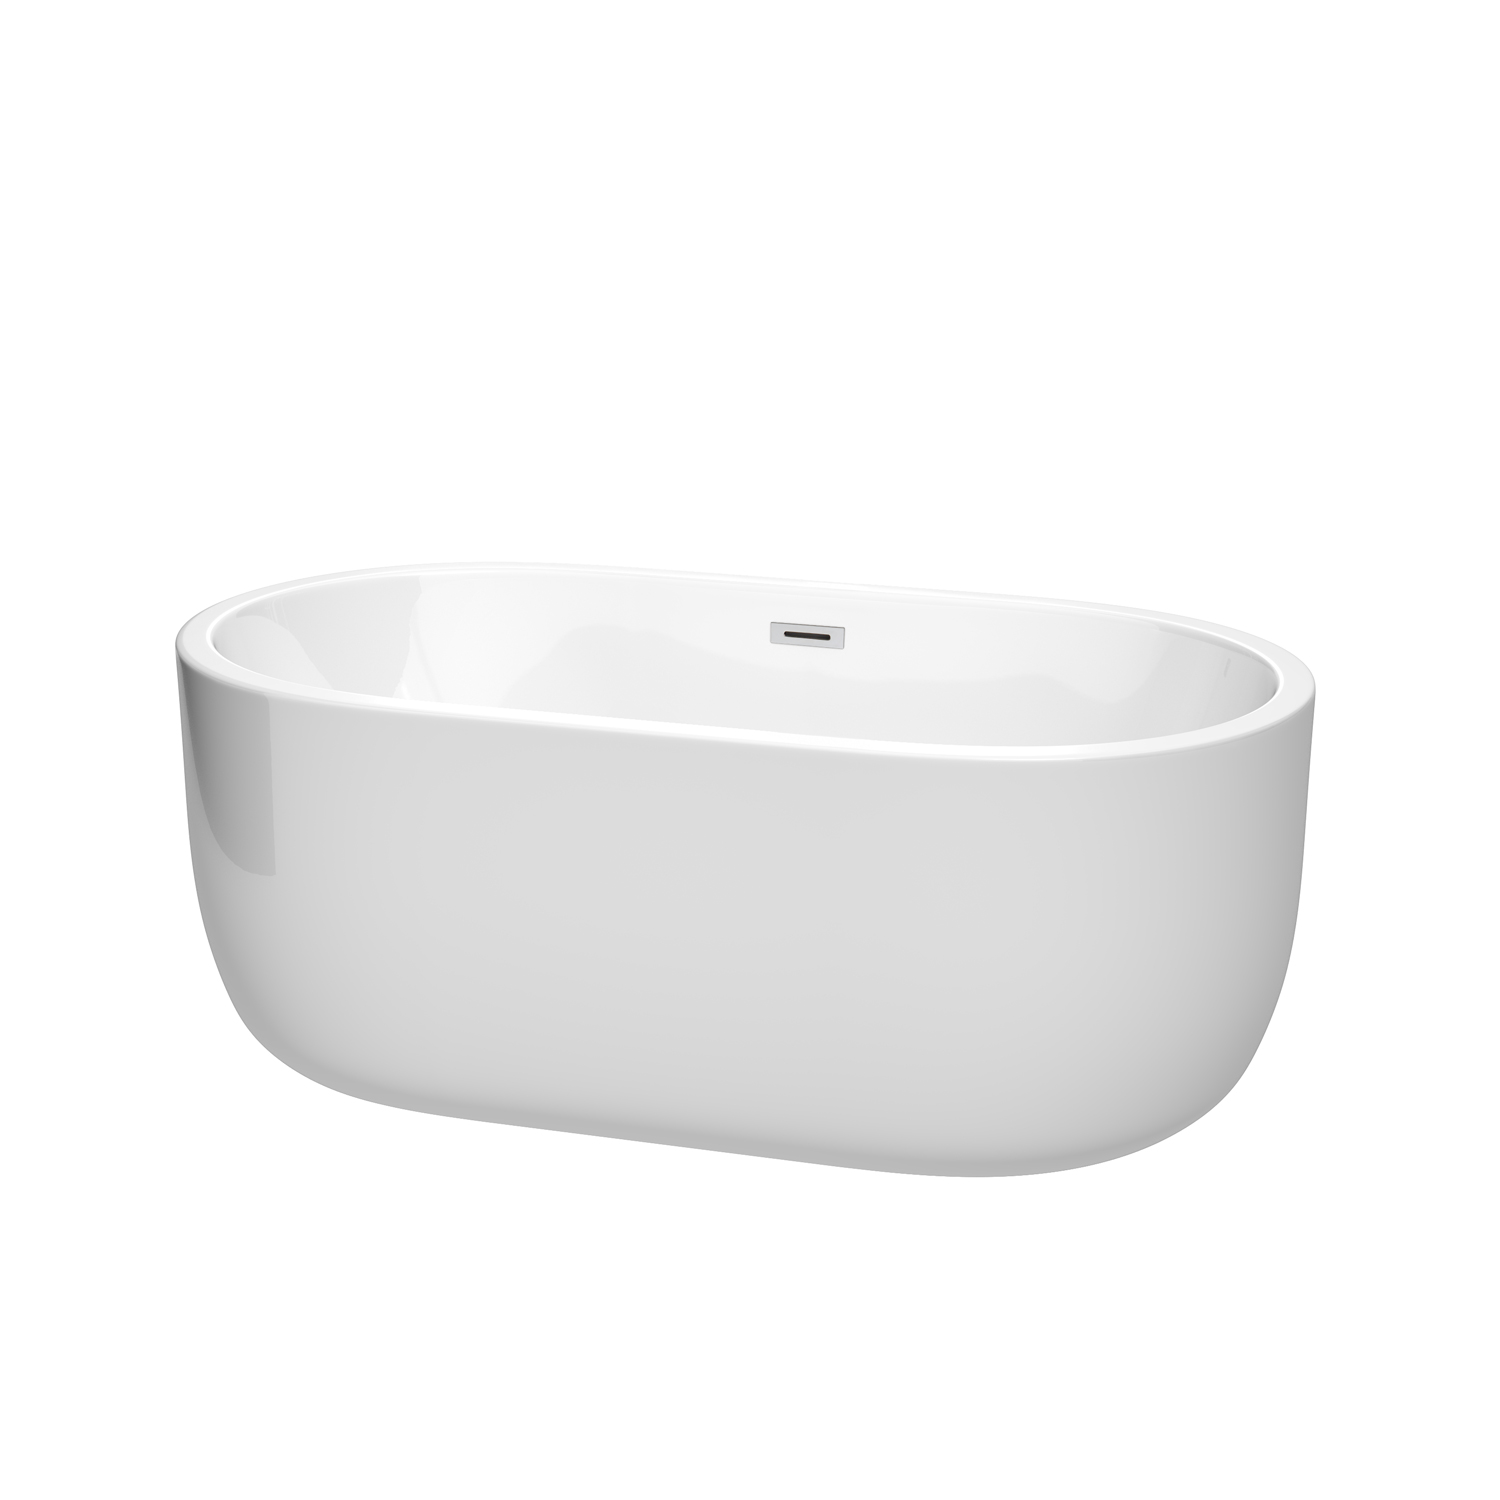 60" Freestanding Bathtub in White with Polished Chrome Drain and Overflow Trim with Hardware and Faucet Options